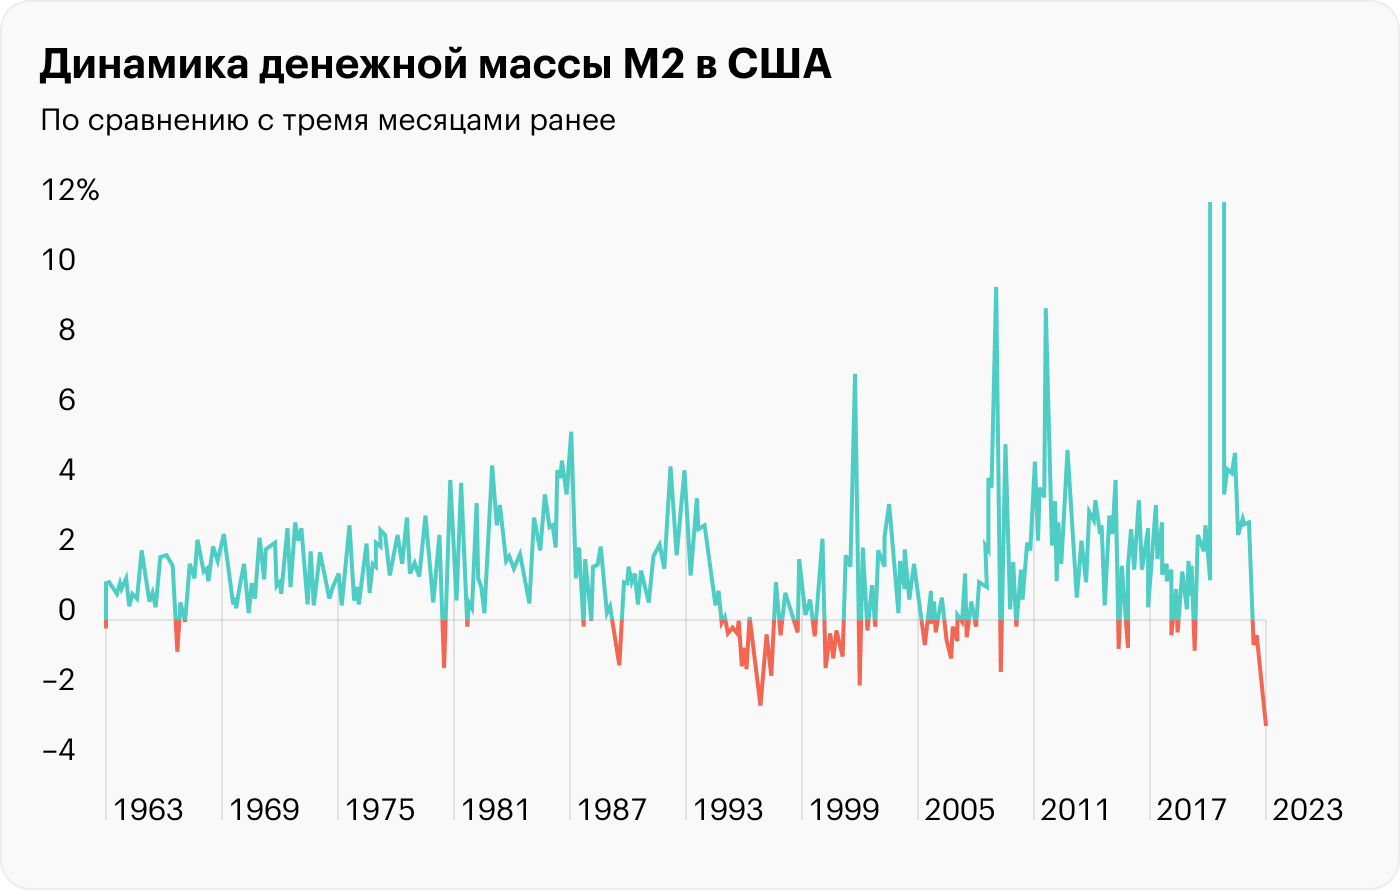 Источник: Daily Shot, The recent decline in the money supply